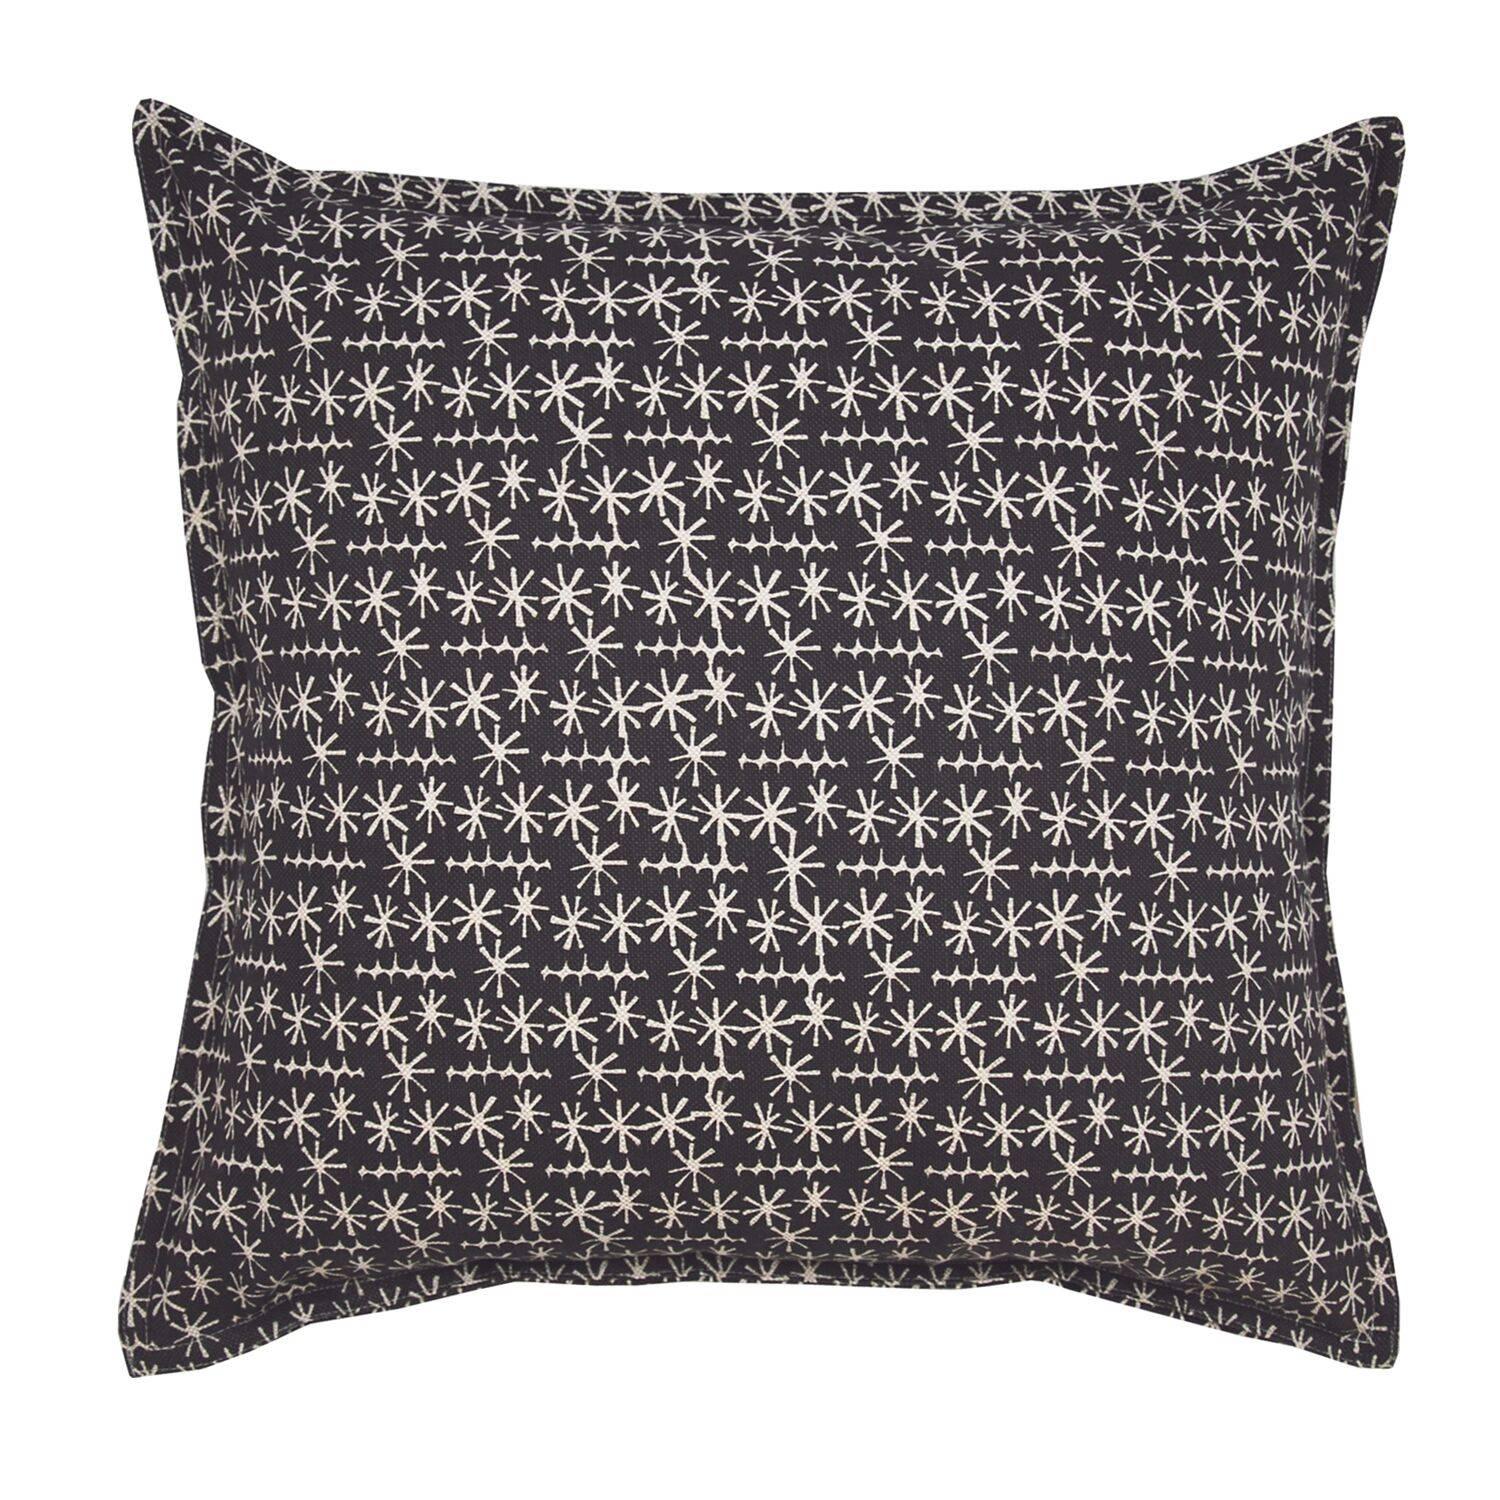 Slate Star Ticket on Wheat Cotton Linen Pillow For Sale